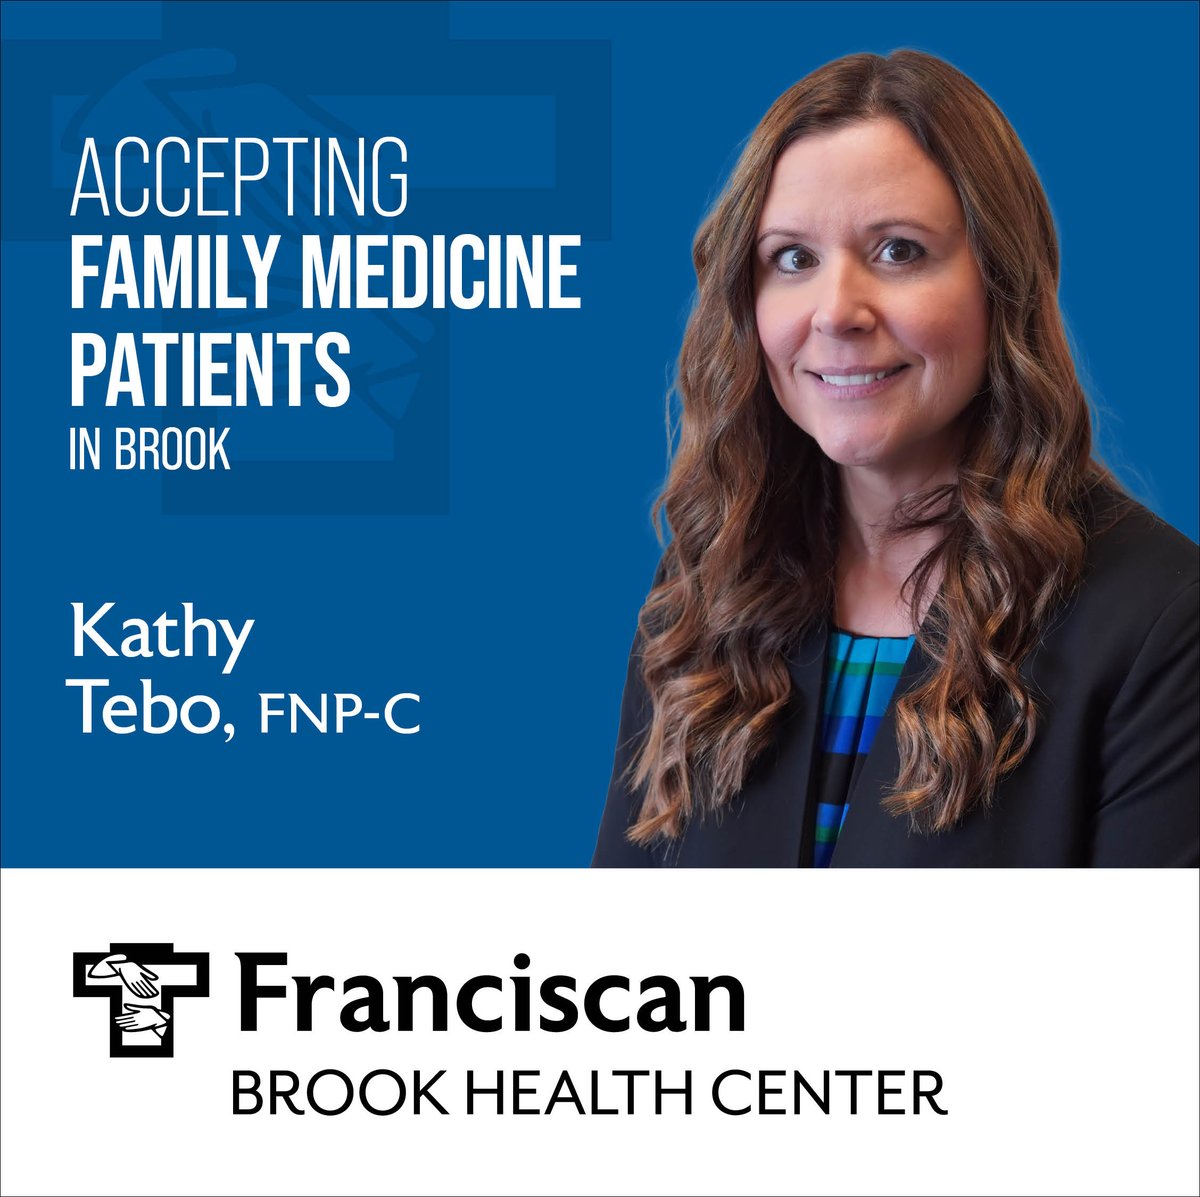 Welcome board-certified family nurse practitioner Kathy Tebo, FNP-C, to Franciscan Brook Health Center located at 420 East Main Street in Brook, Indiana. For more information or to make an appointment, call (219) 275-2521. franciscanhealth.org/about/news-and…